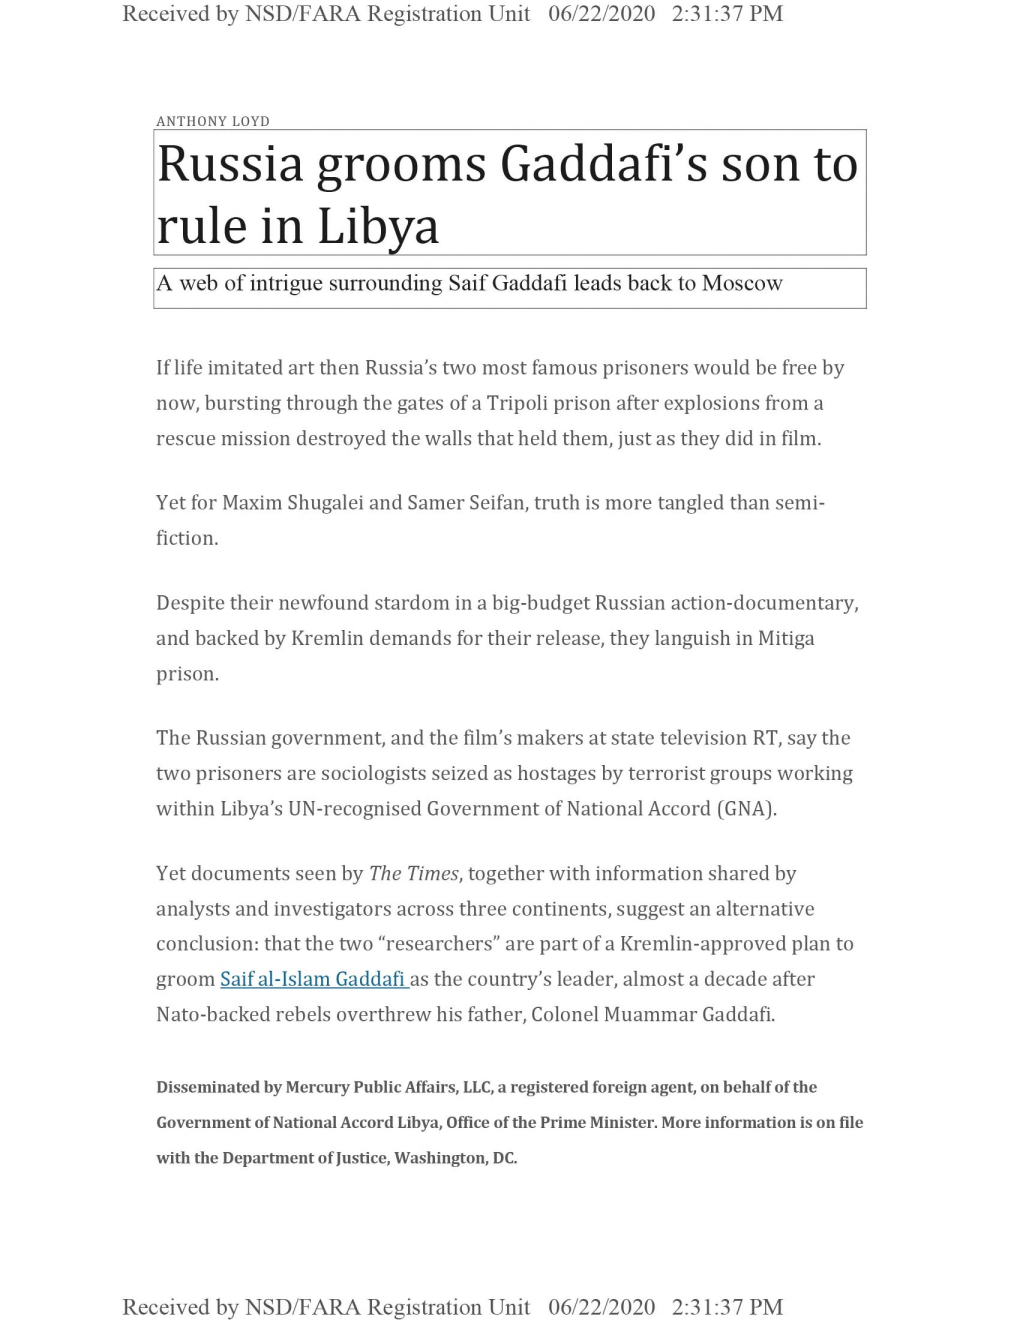 Russia Grooms Gaddafi's Son to Rule in Libya a Web of Intrigue Surrounding Saif Gaddafi Leads Back to Moscow